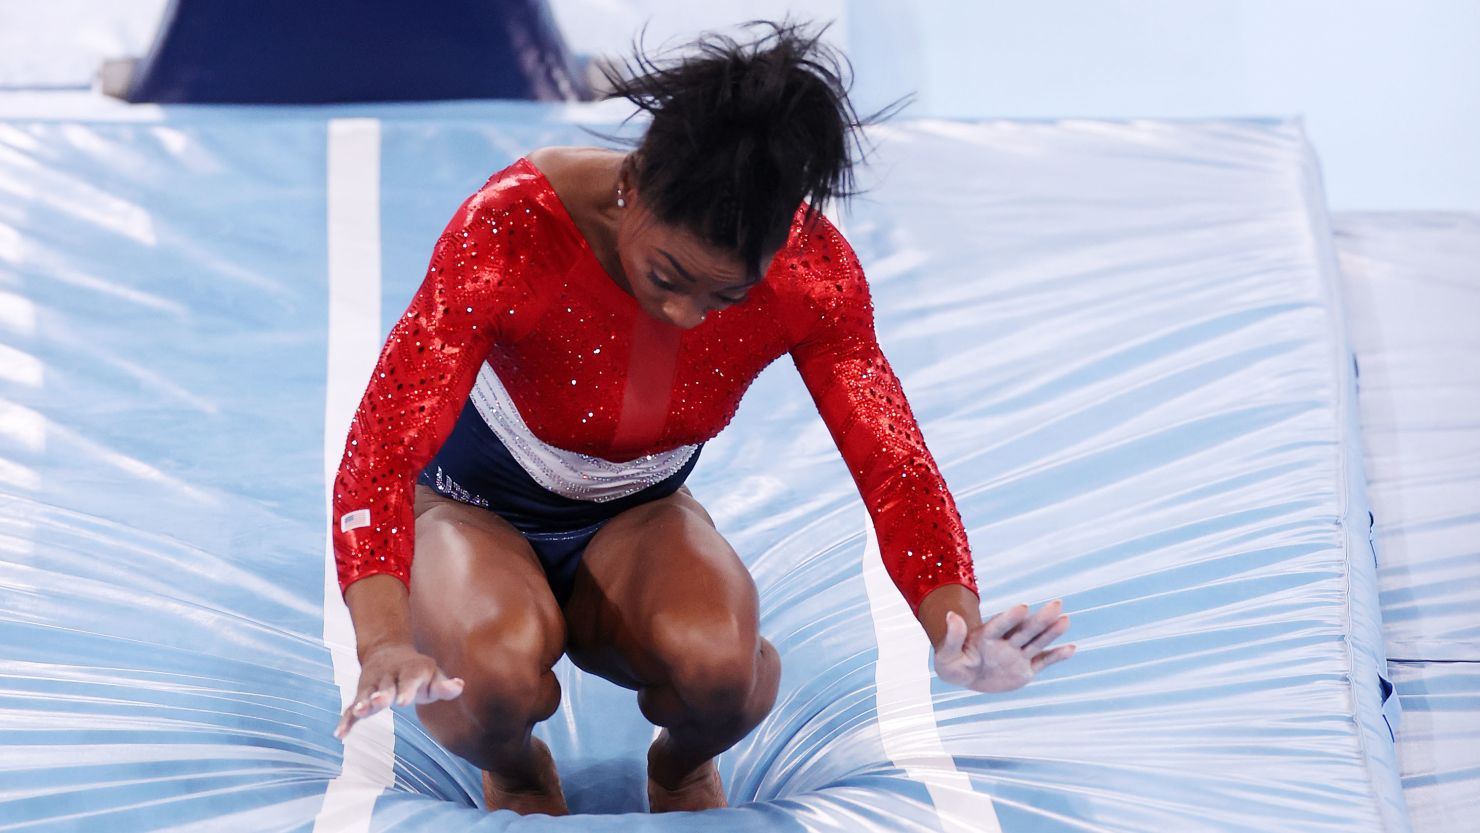 Biles lands awkwardly while competing in the vault during the Tokyo Olympics women's team event.